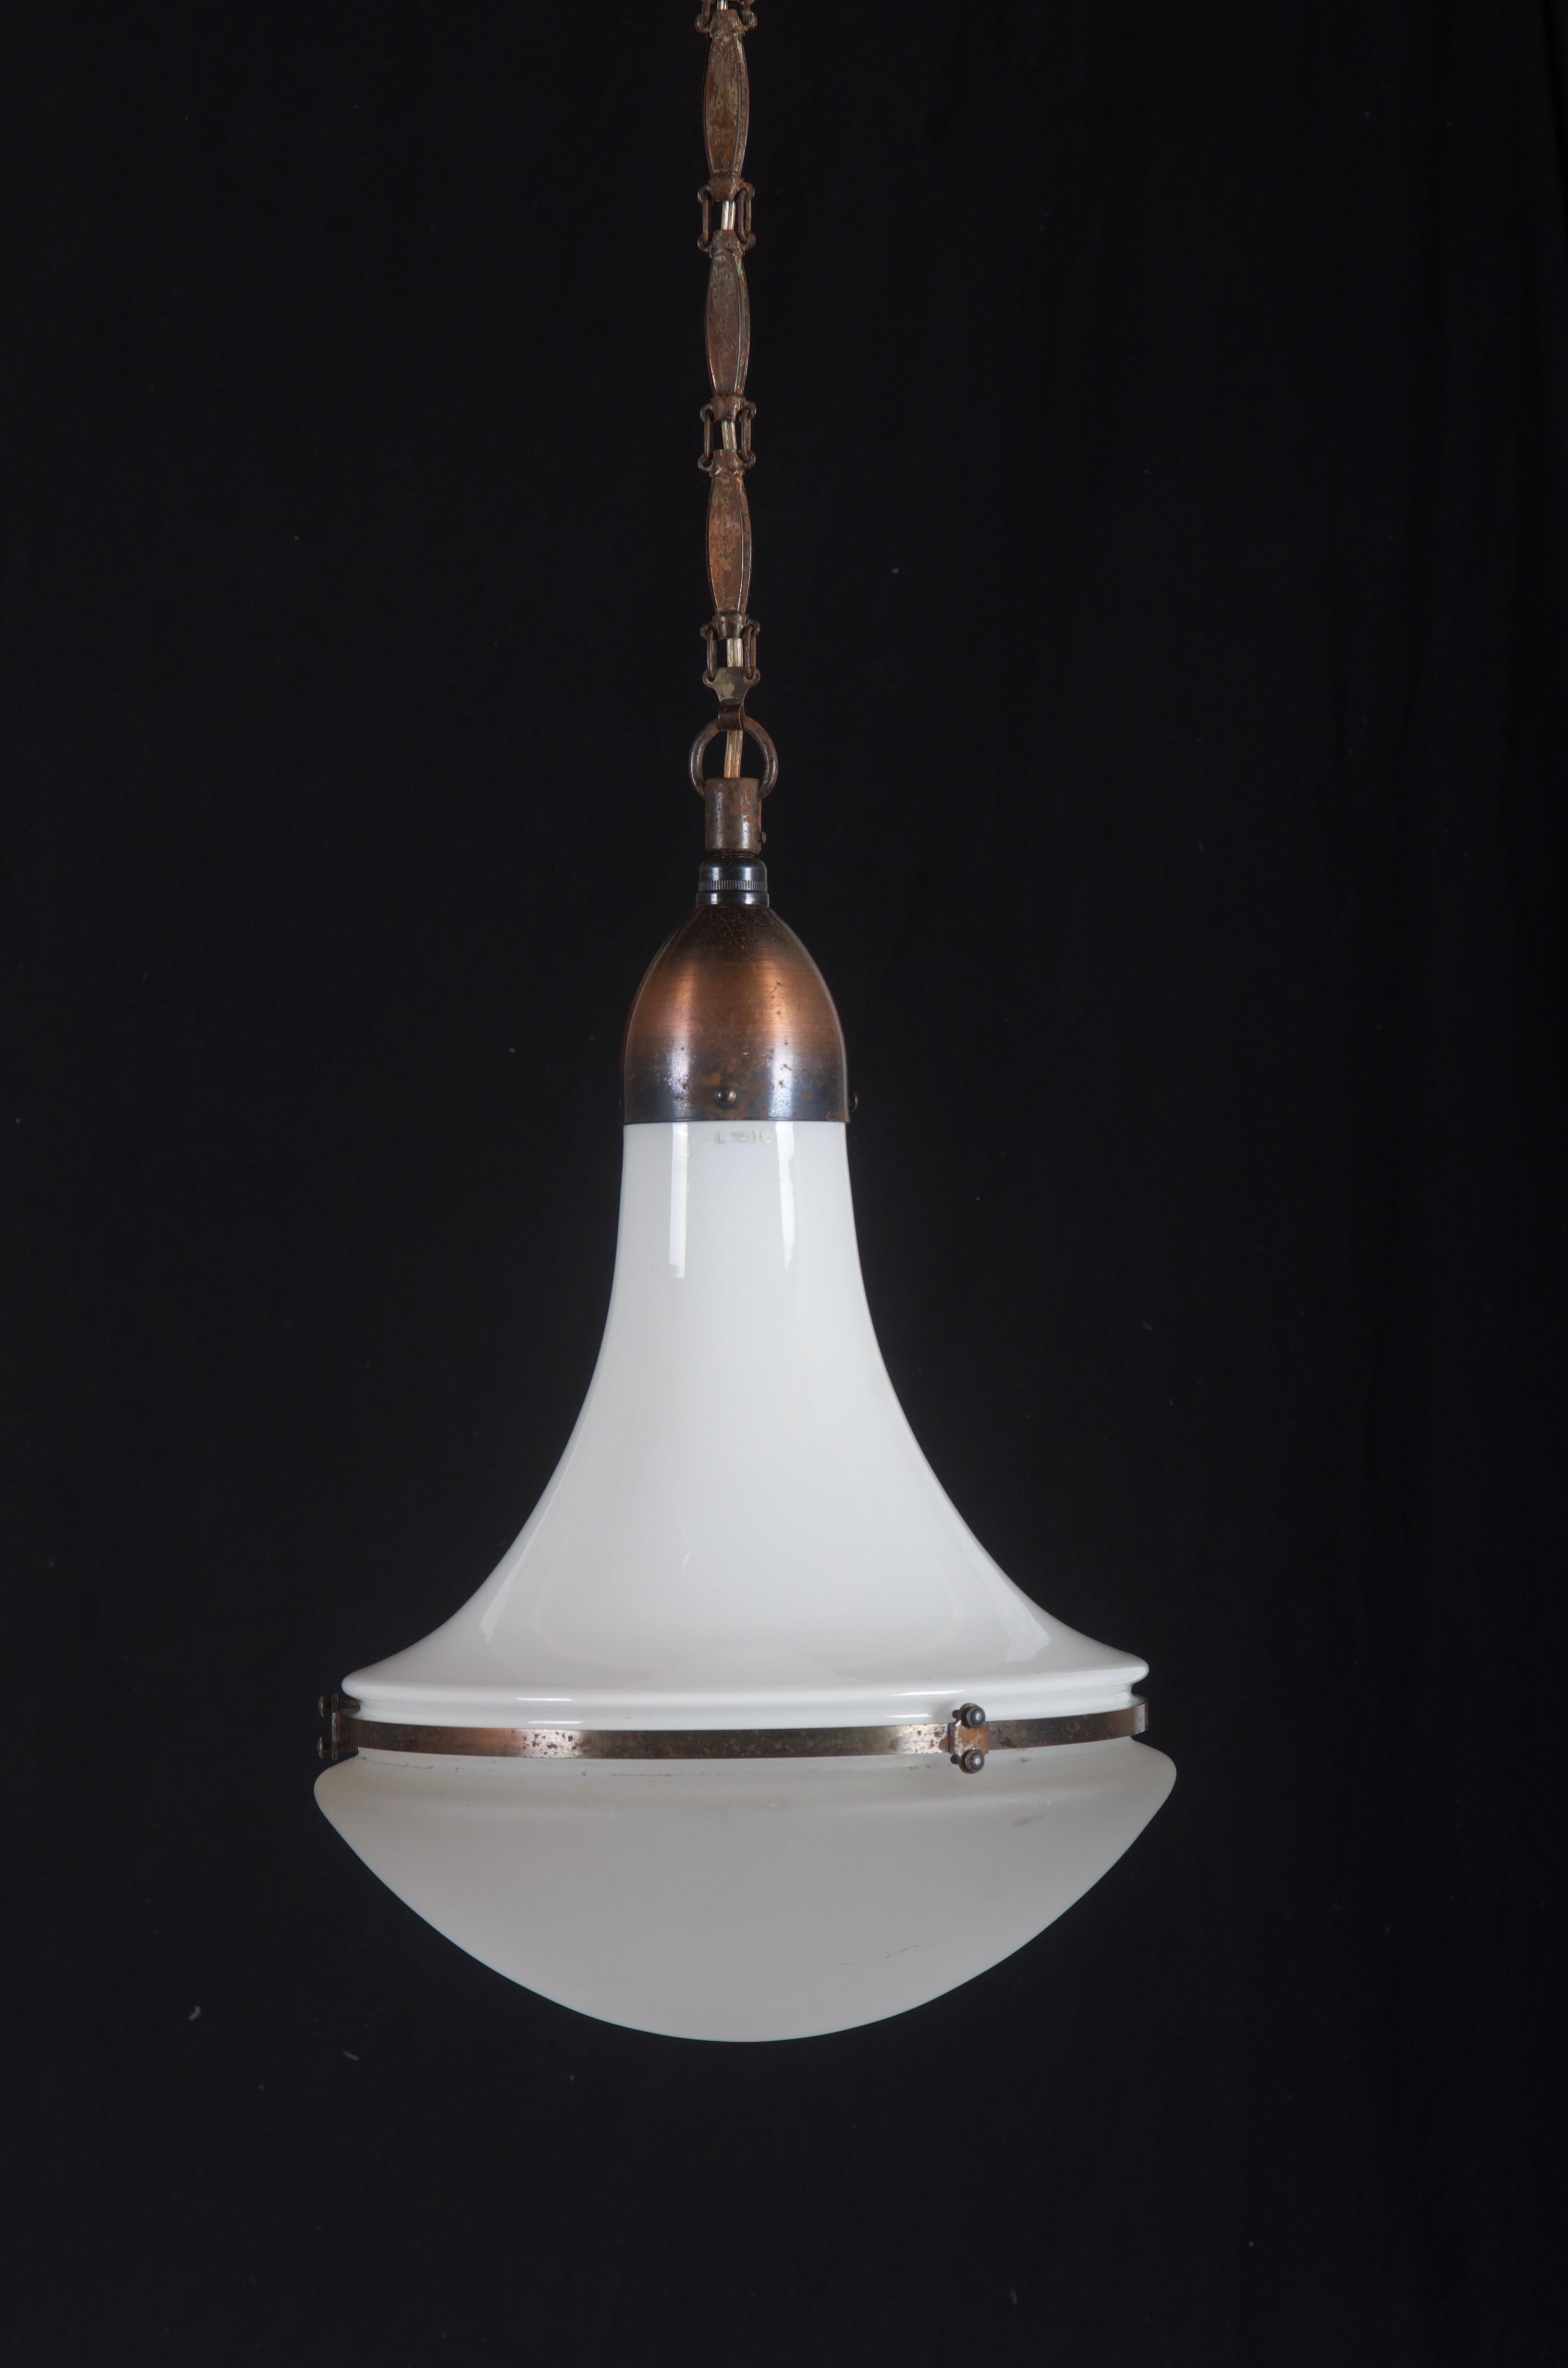 The pendant was designed by Peter Behrens in 1908 for Siemens.
This lamp is completely original with a nice combination of an opaline glass upper shade and a frosted clear glass lower shade.
All metal/copper parts are complete and original. Some